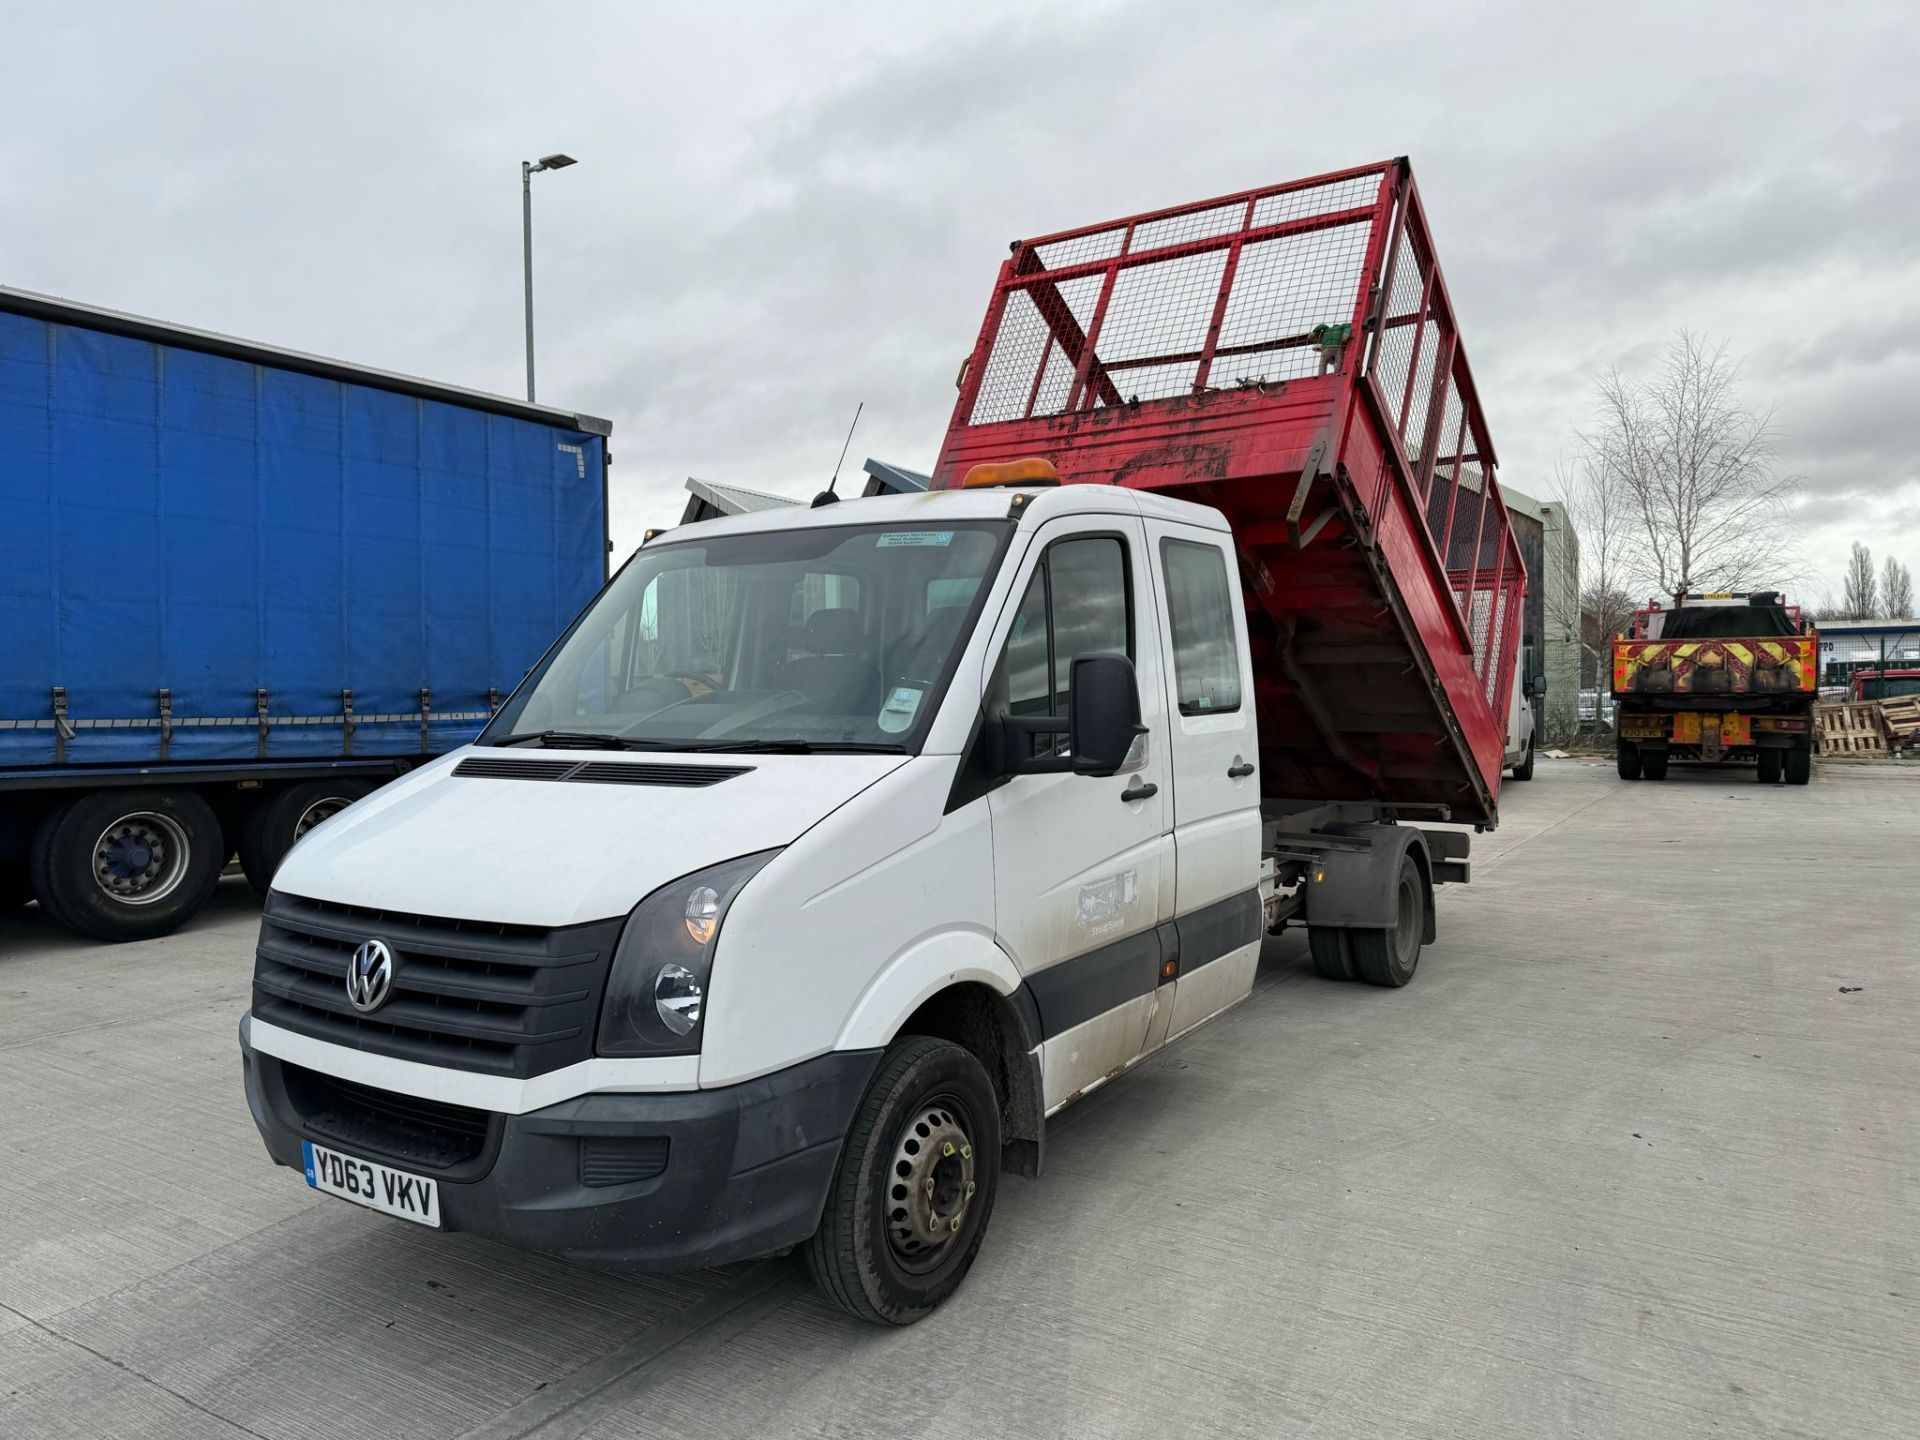 2013, VOLKSWAGEN Crafter CR50 Startline TDI, HGV Caged Tipper Van (Ex-Council Owned & Maintained) - Image 16 of 42